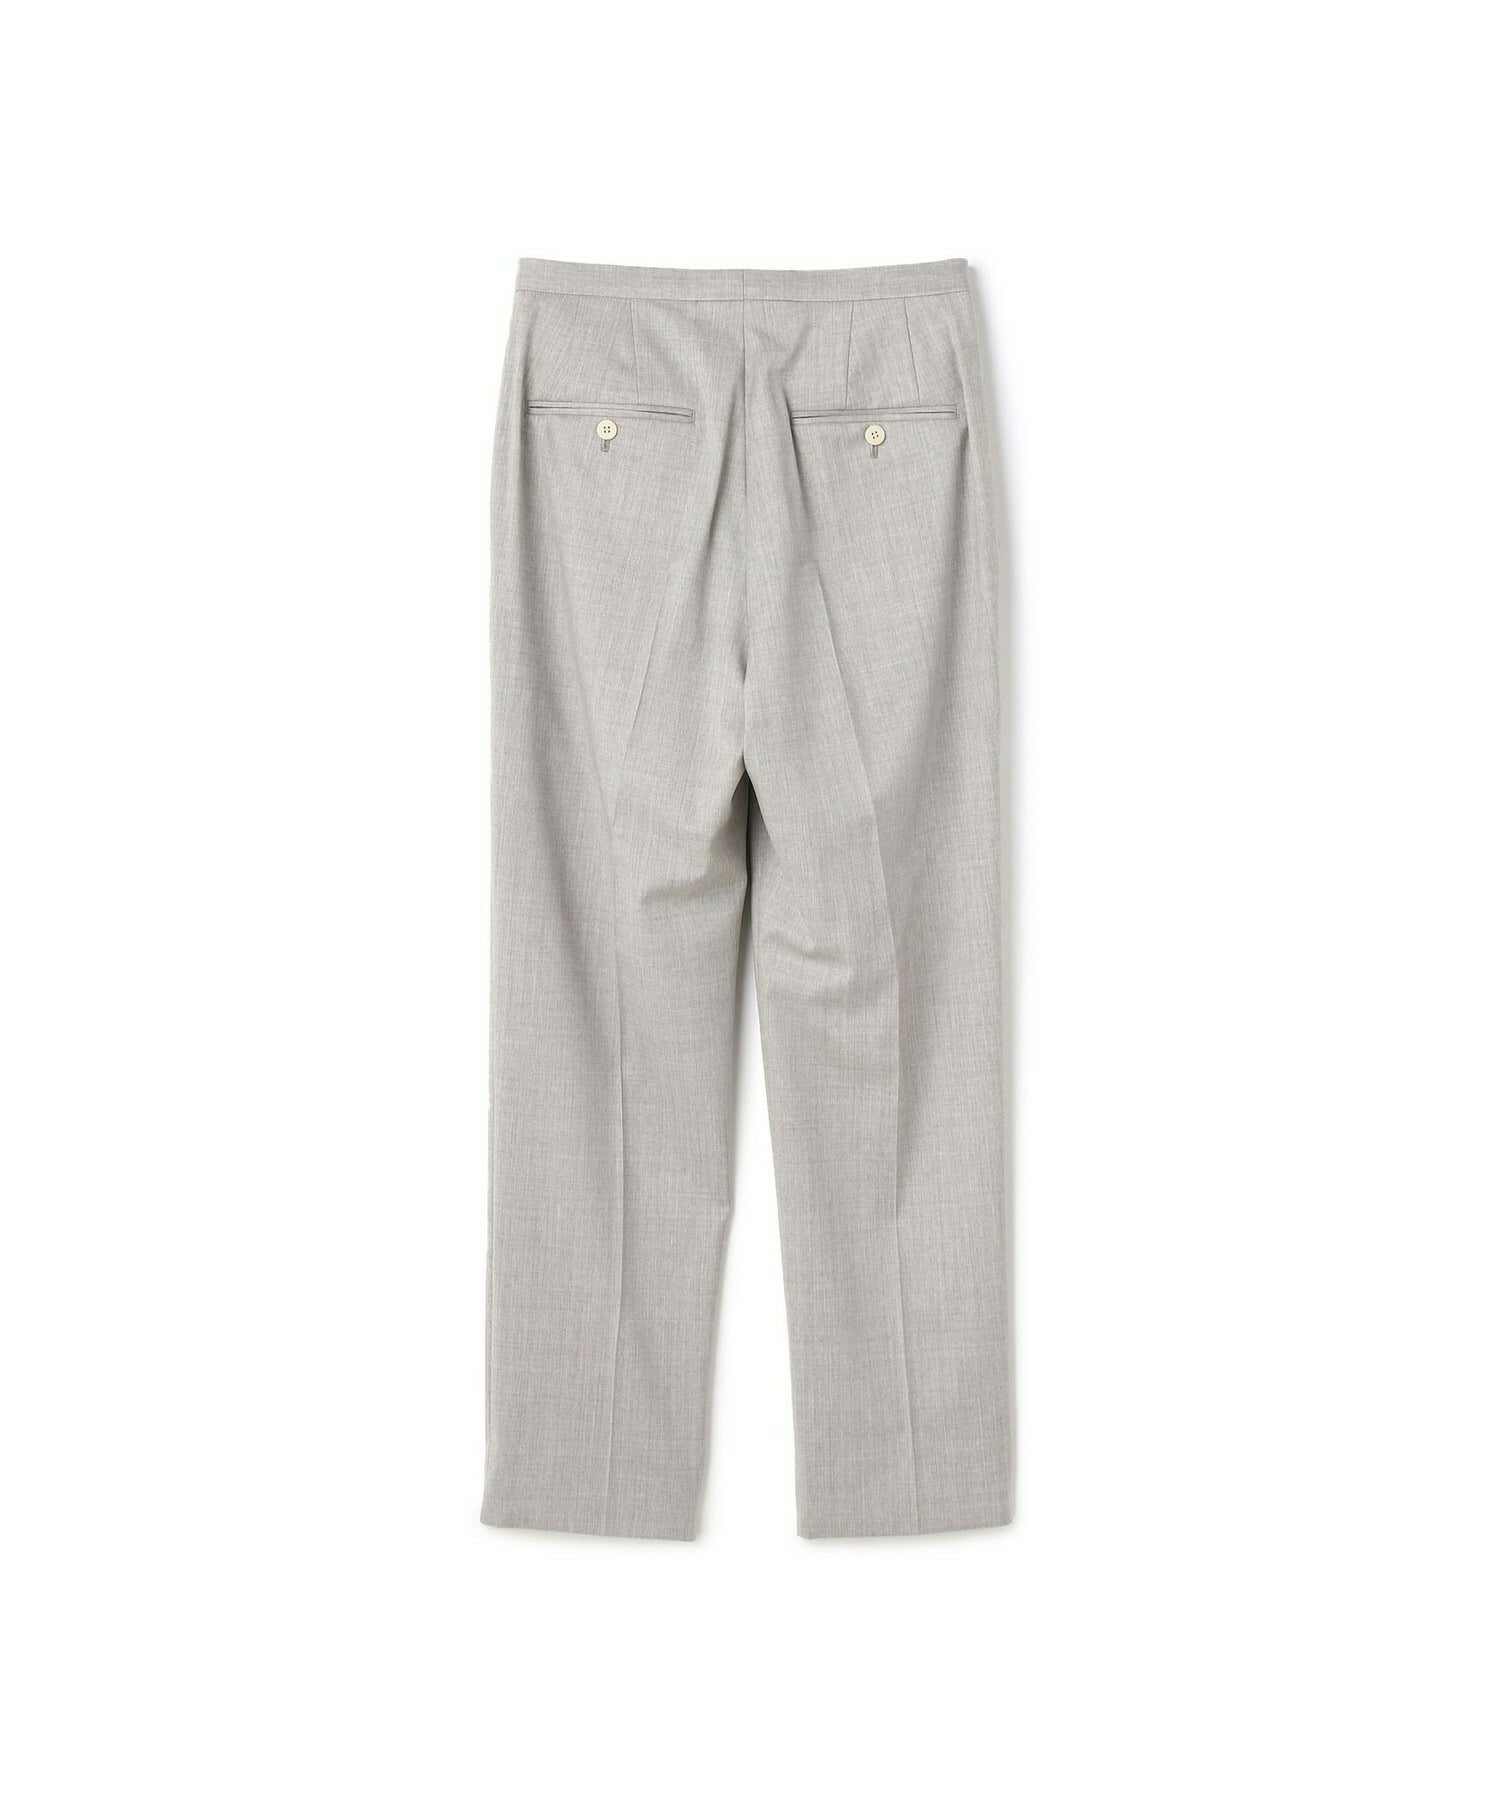 【yoshie inaba】STRETCH WOOL CIGARETTE PANTS 詳細画像 ライトグレー 6